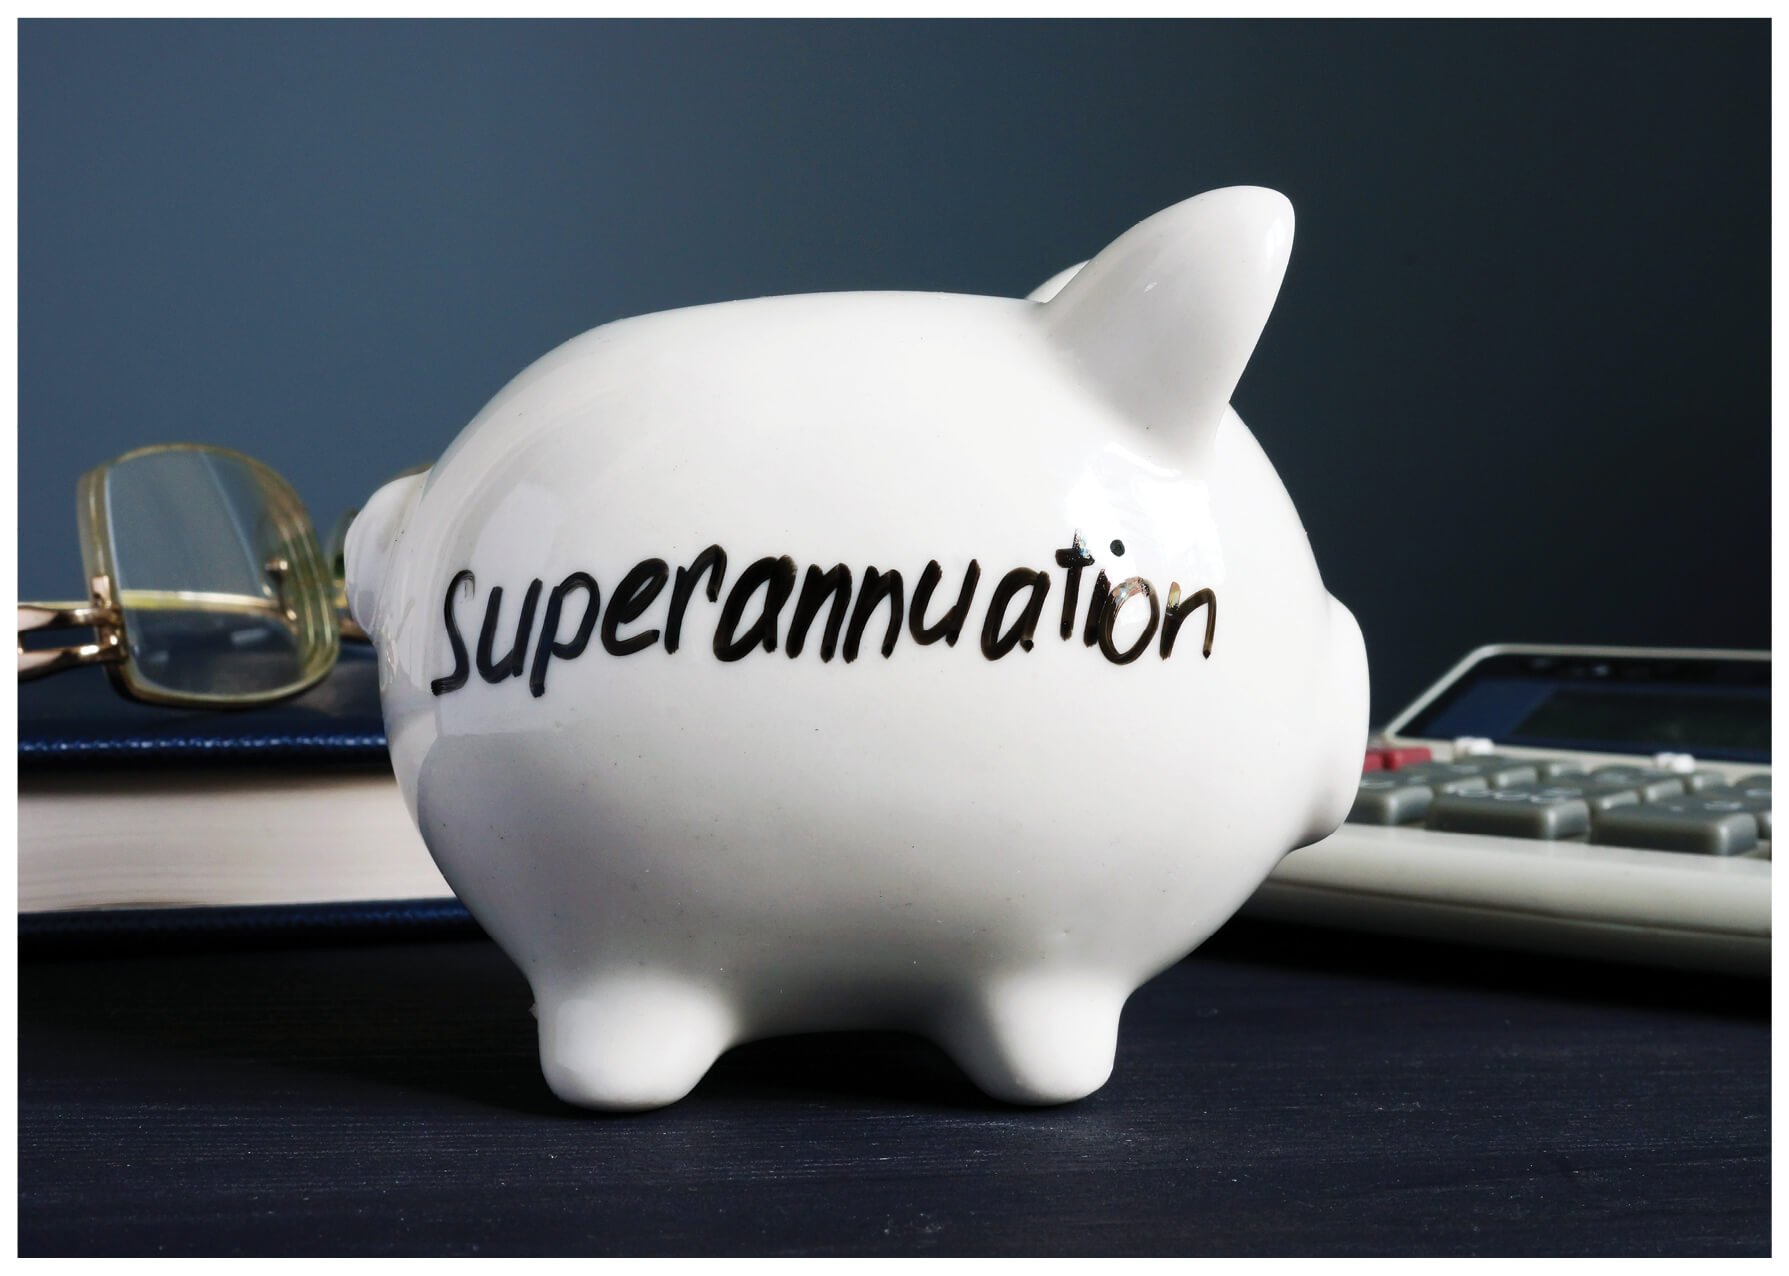 Personal Superannuation Contributions - Now Tax Deductible for Most Taxpayers